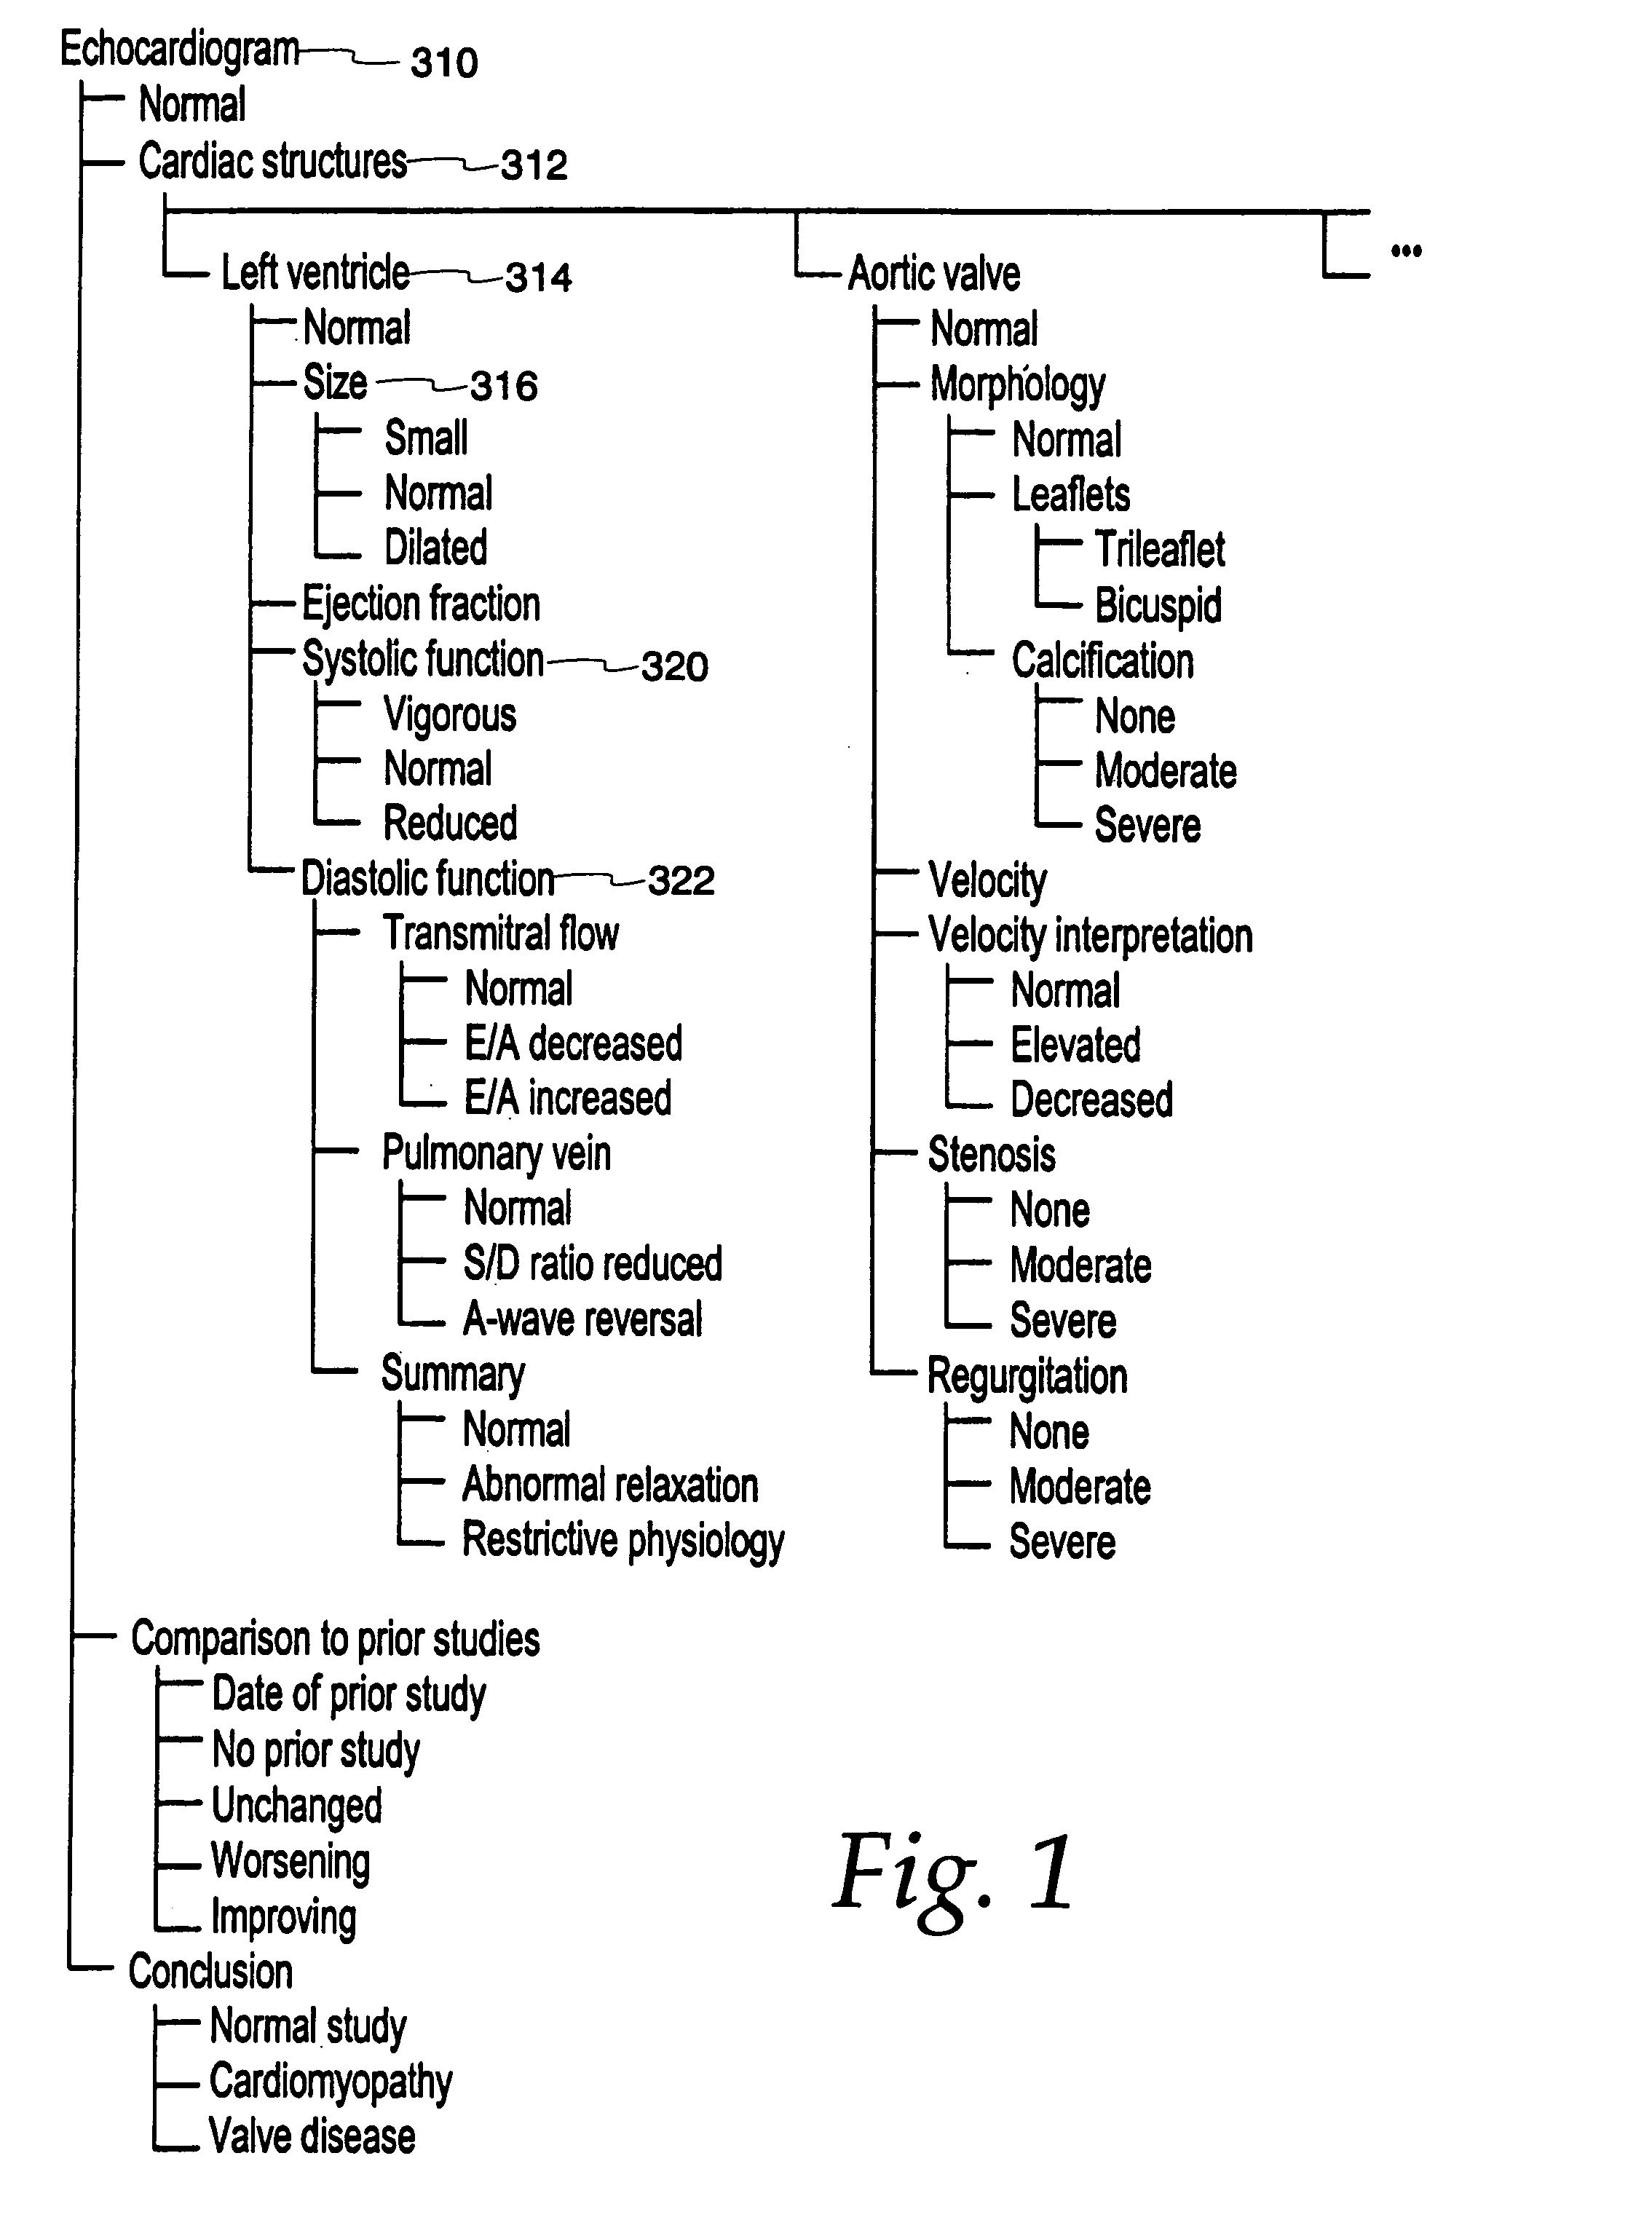 Method and system for generation of medical reports from data in a hierarchically-organized database